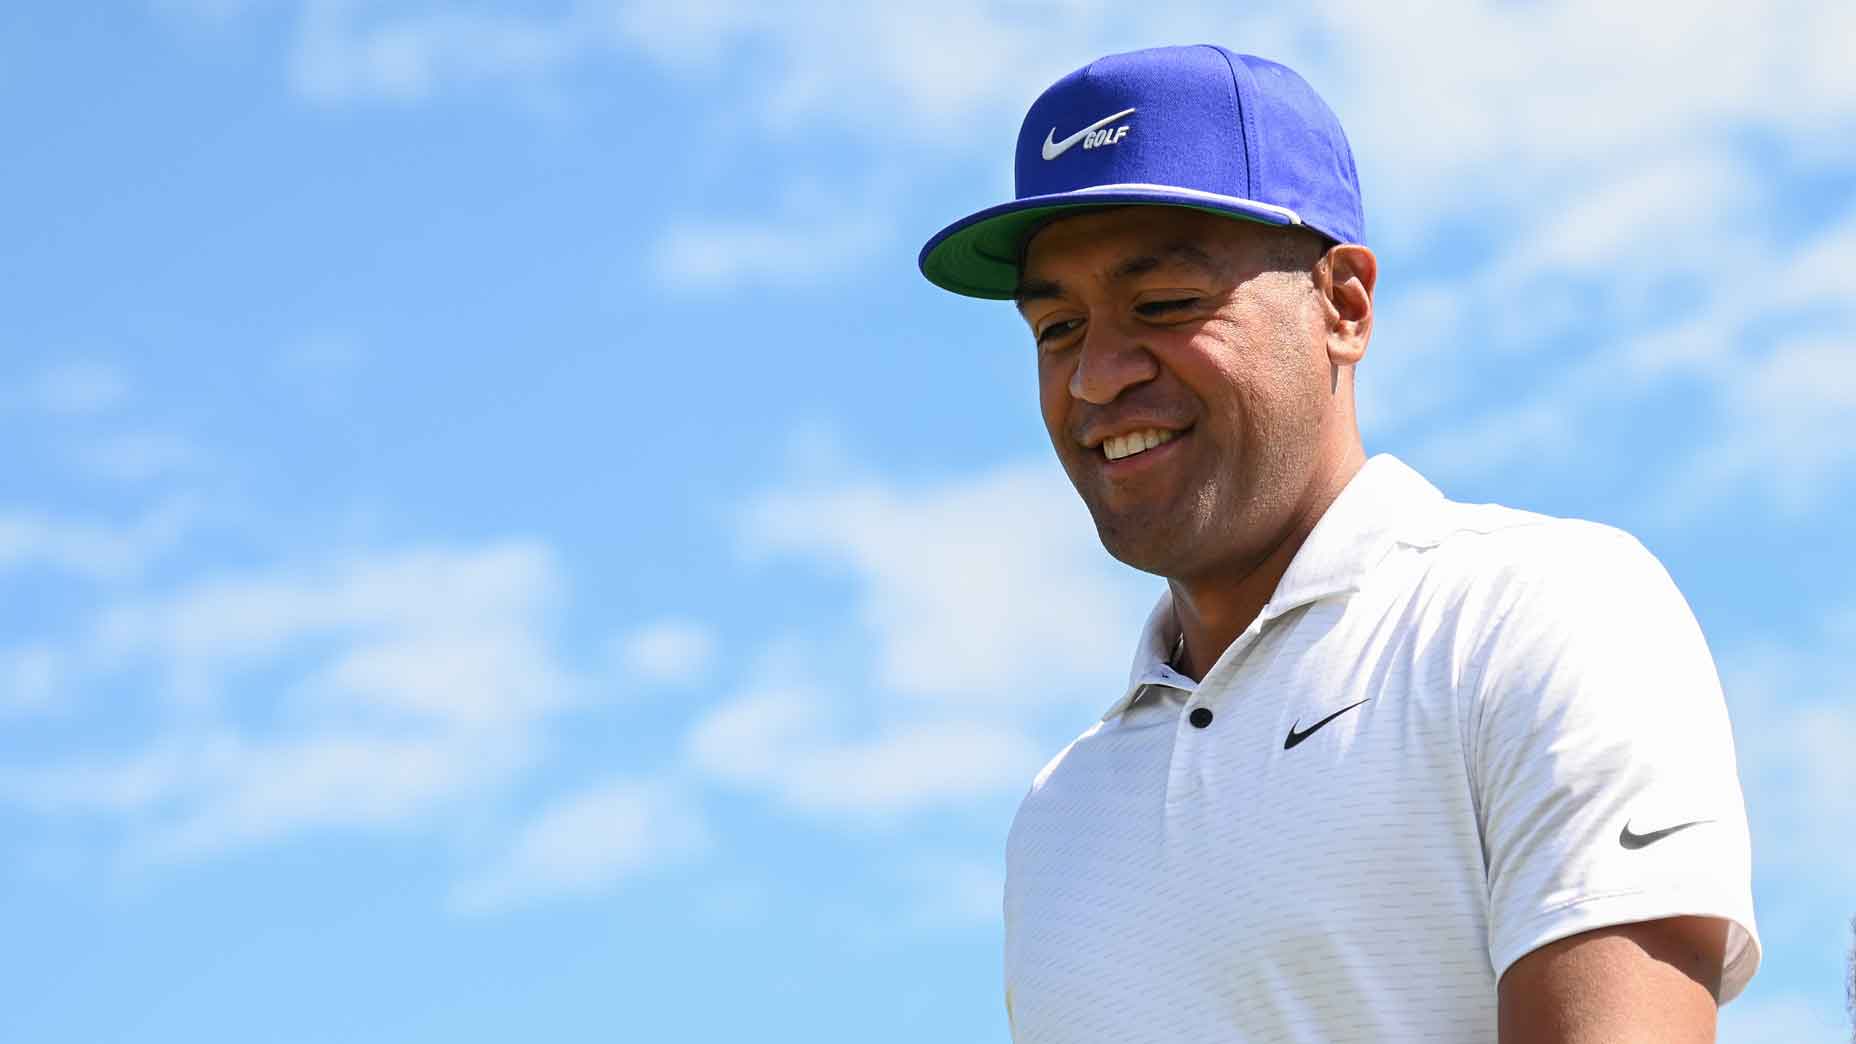 Here's why Tony Finau isn't discouraged by his recent close calls